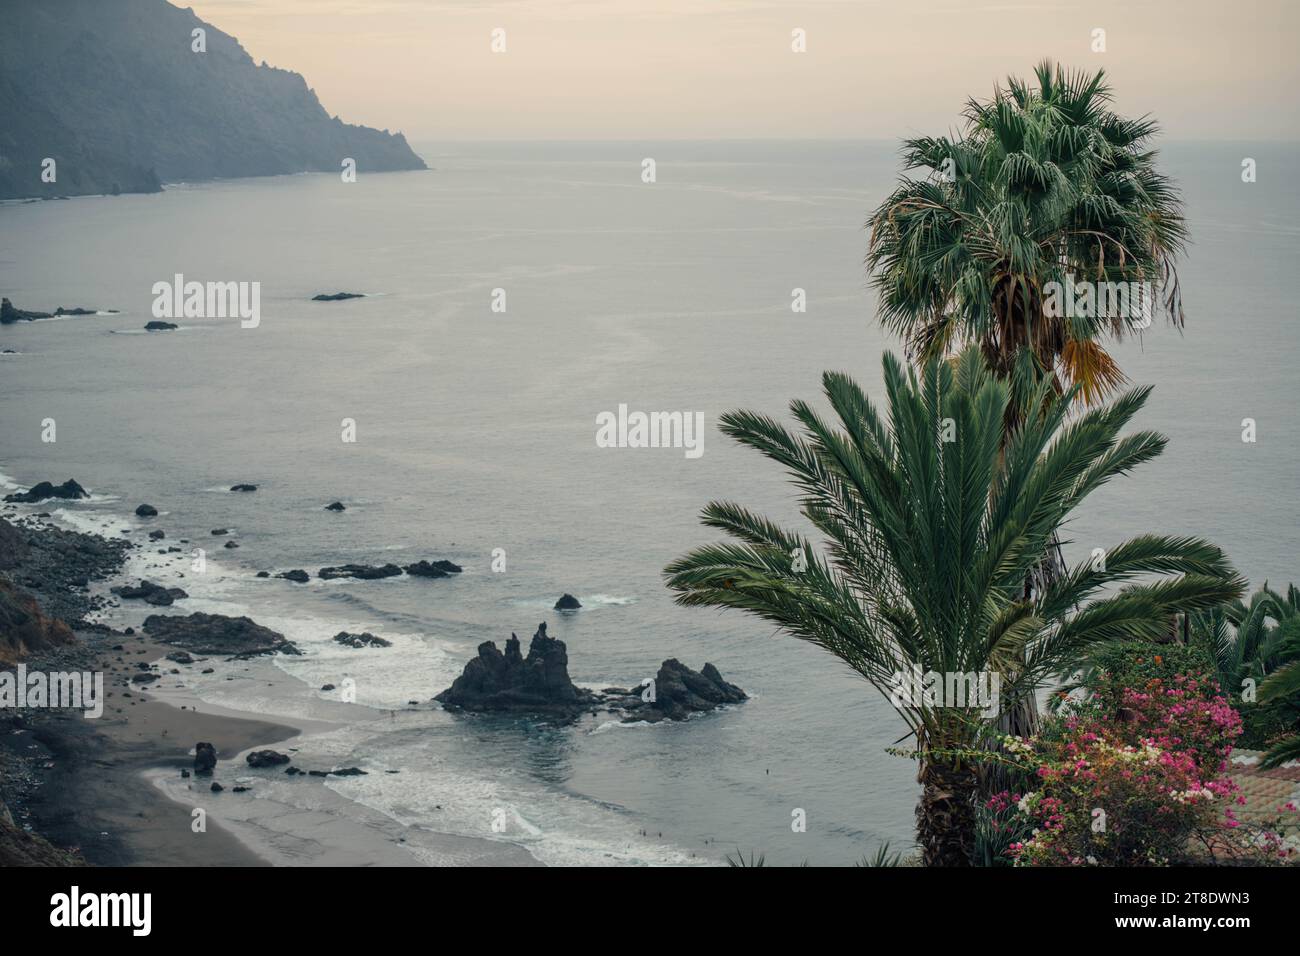 Landscape with palm trees in the north coast of Tenerife Stock Photo